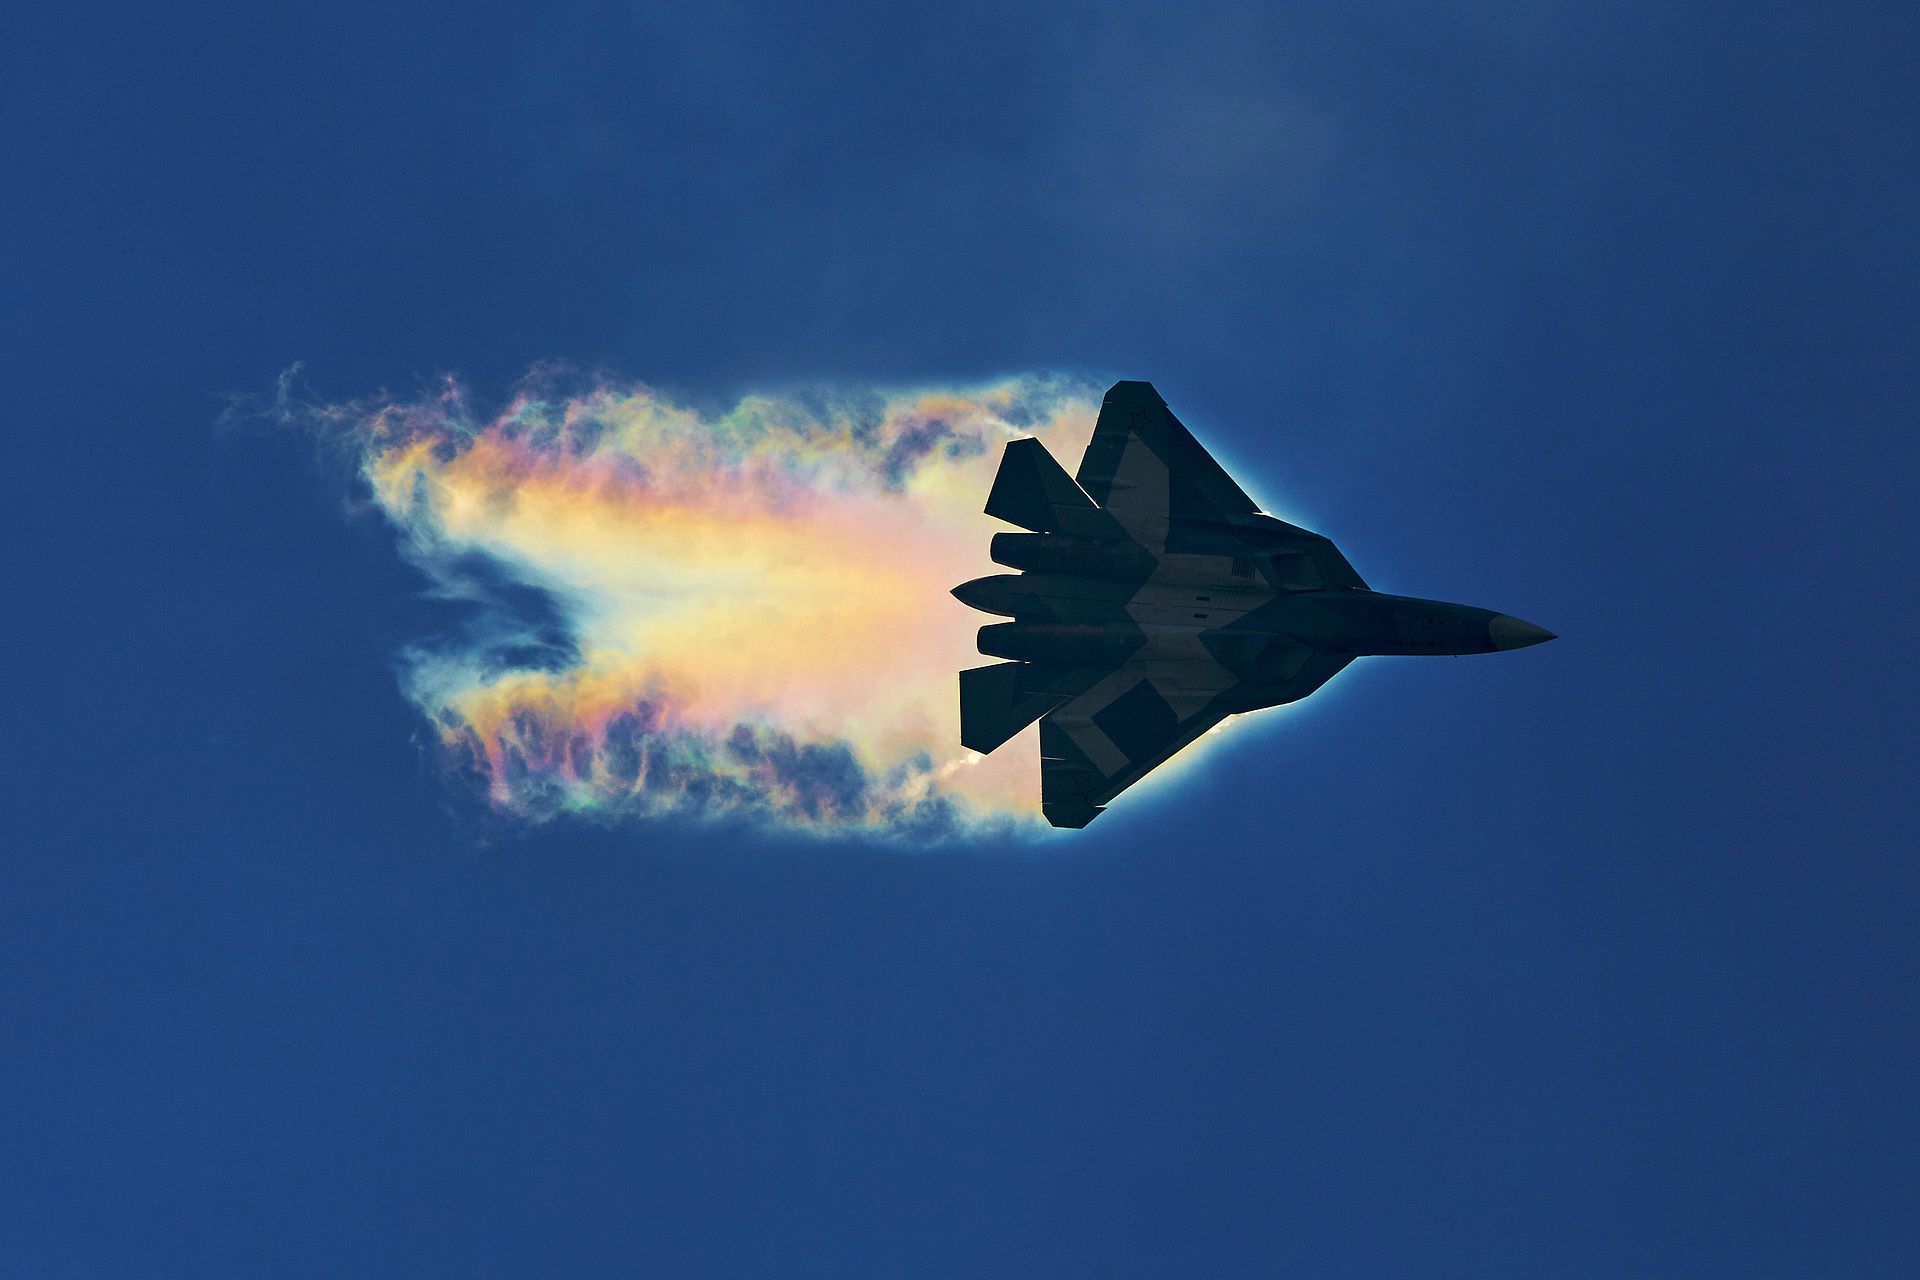 Su-57 Video: Watch Russia's New Fighter Jet Let Out A Scream